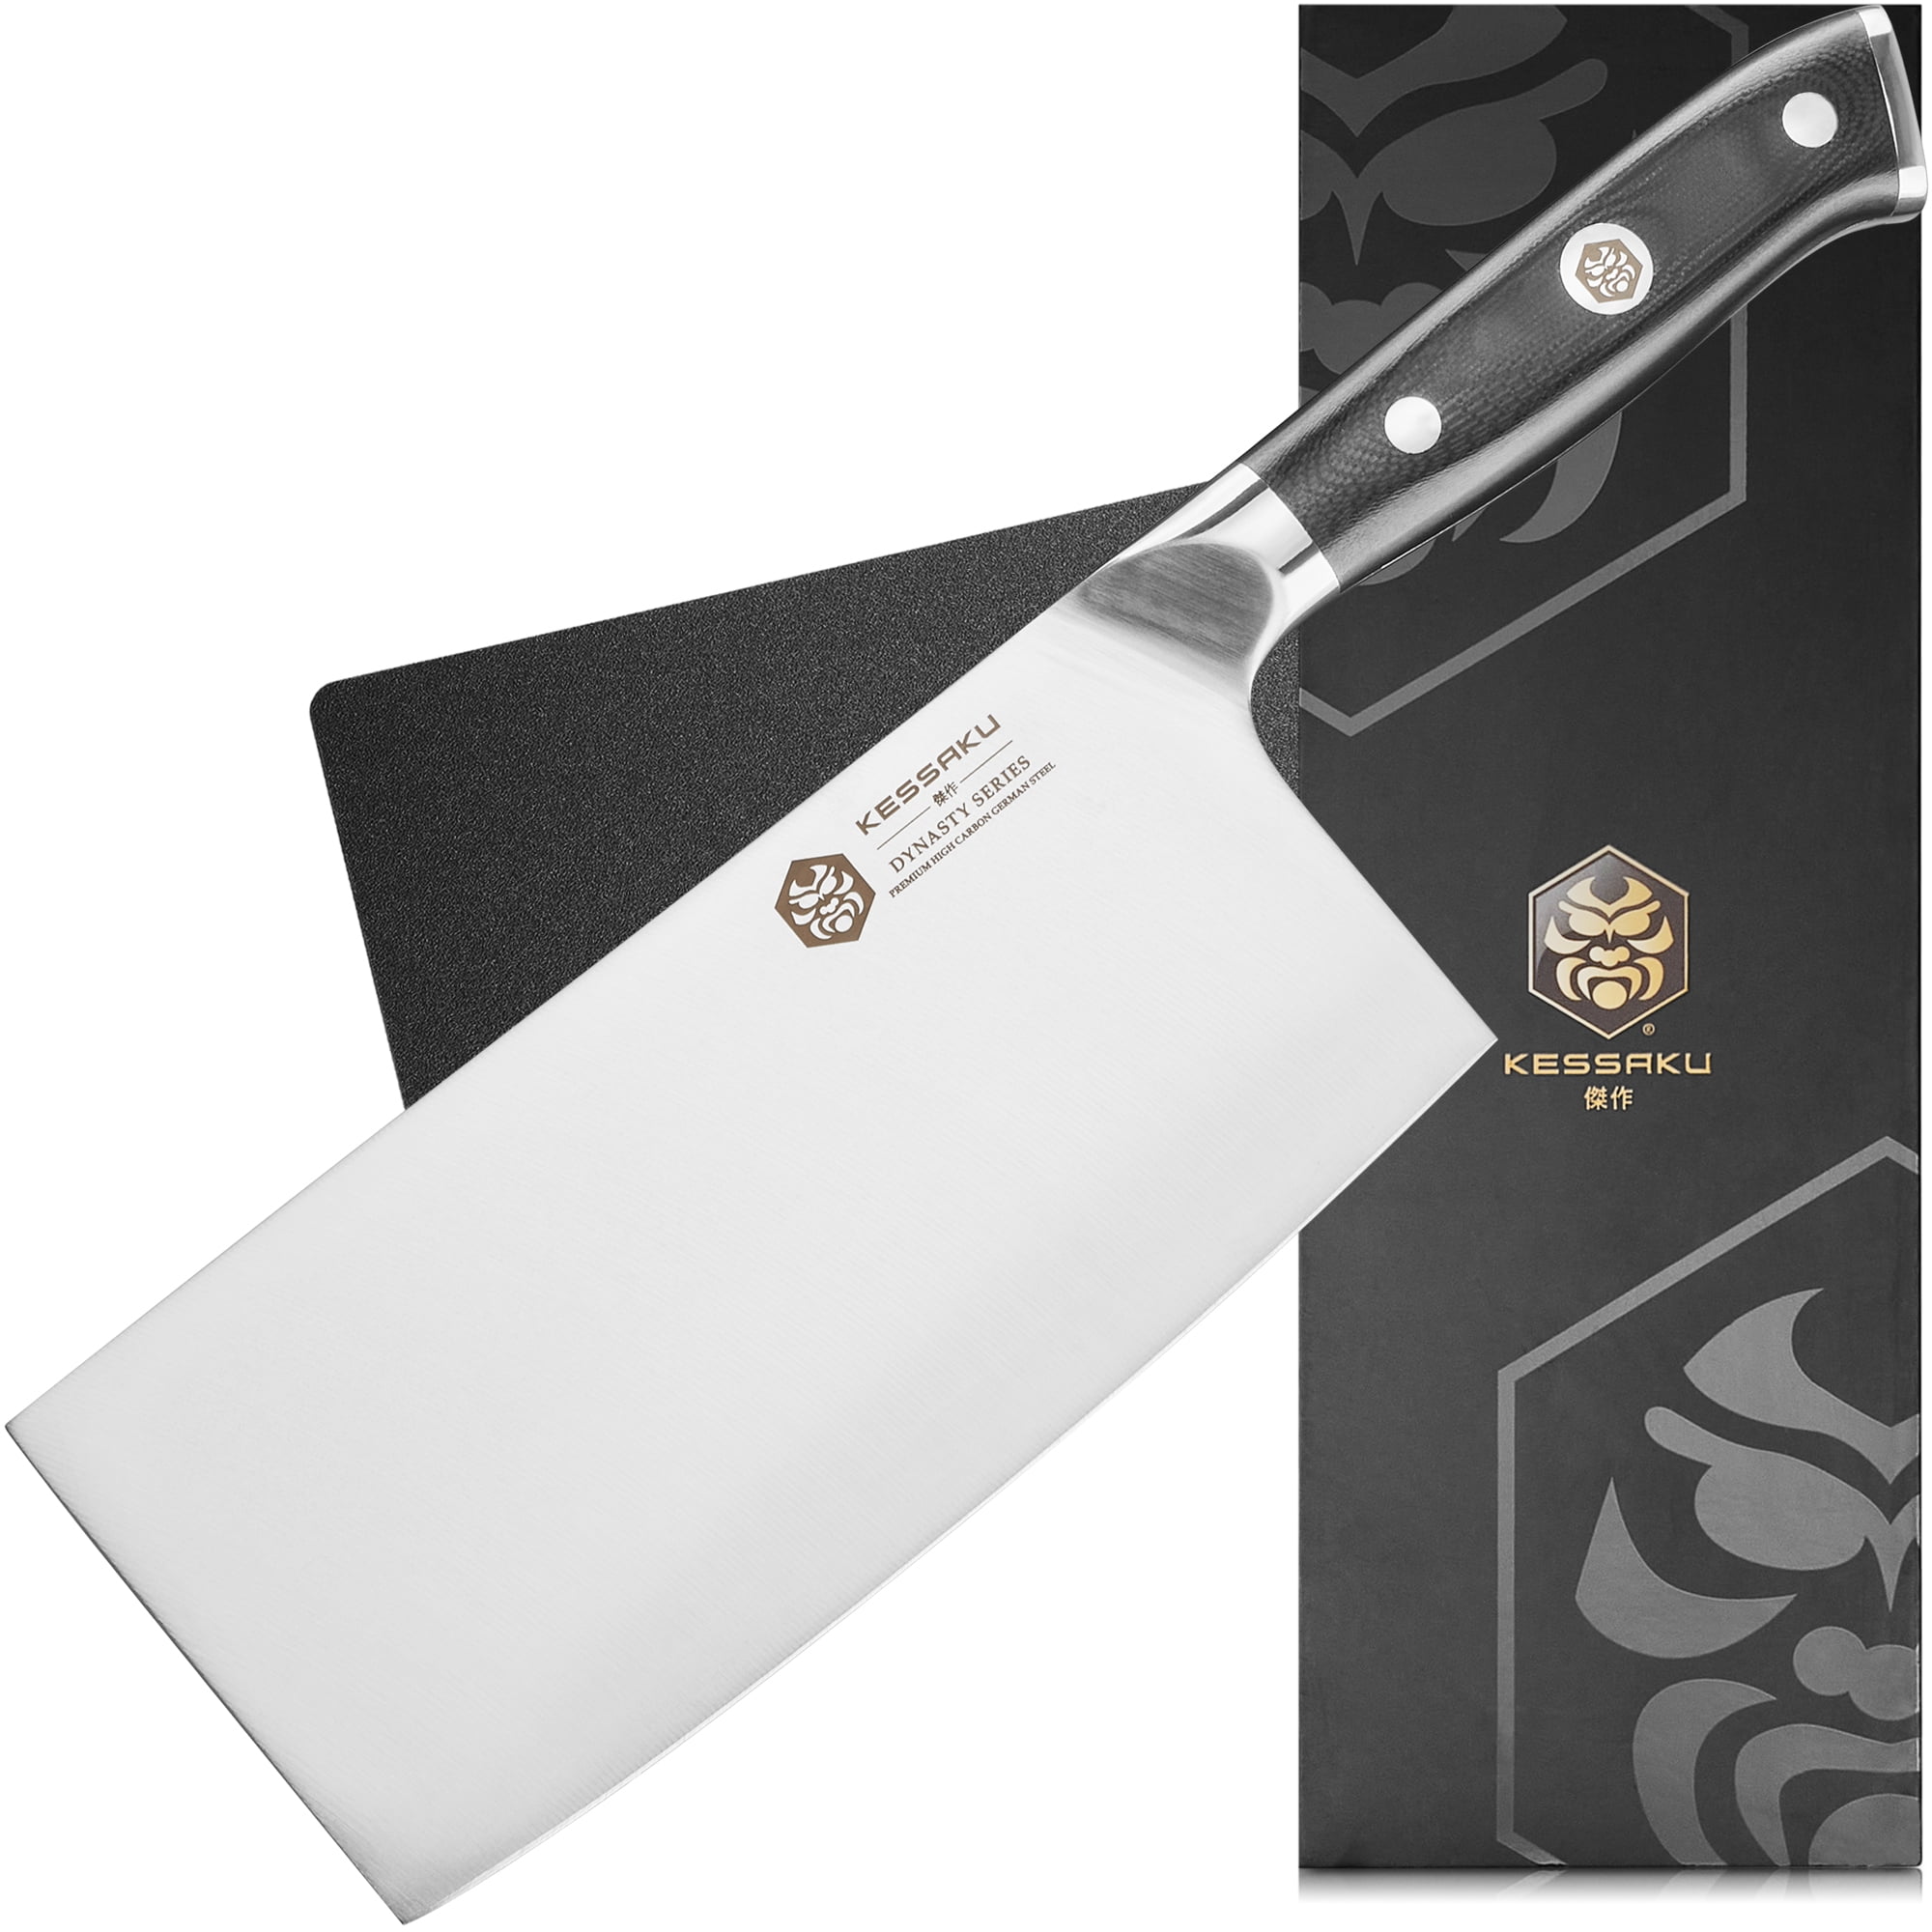 KD Chinese Kitchen Knife Stainless Steel High Carbon Cleaver Chef Slic in  2023